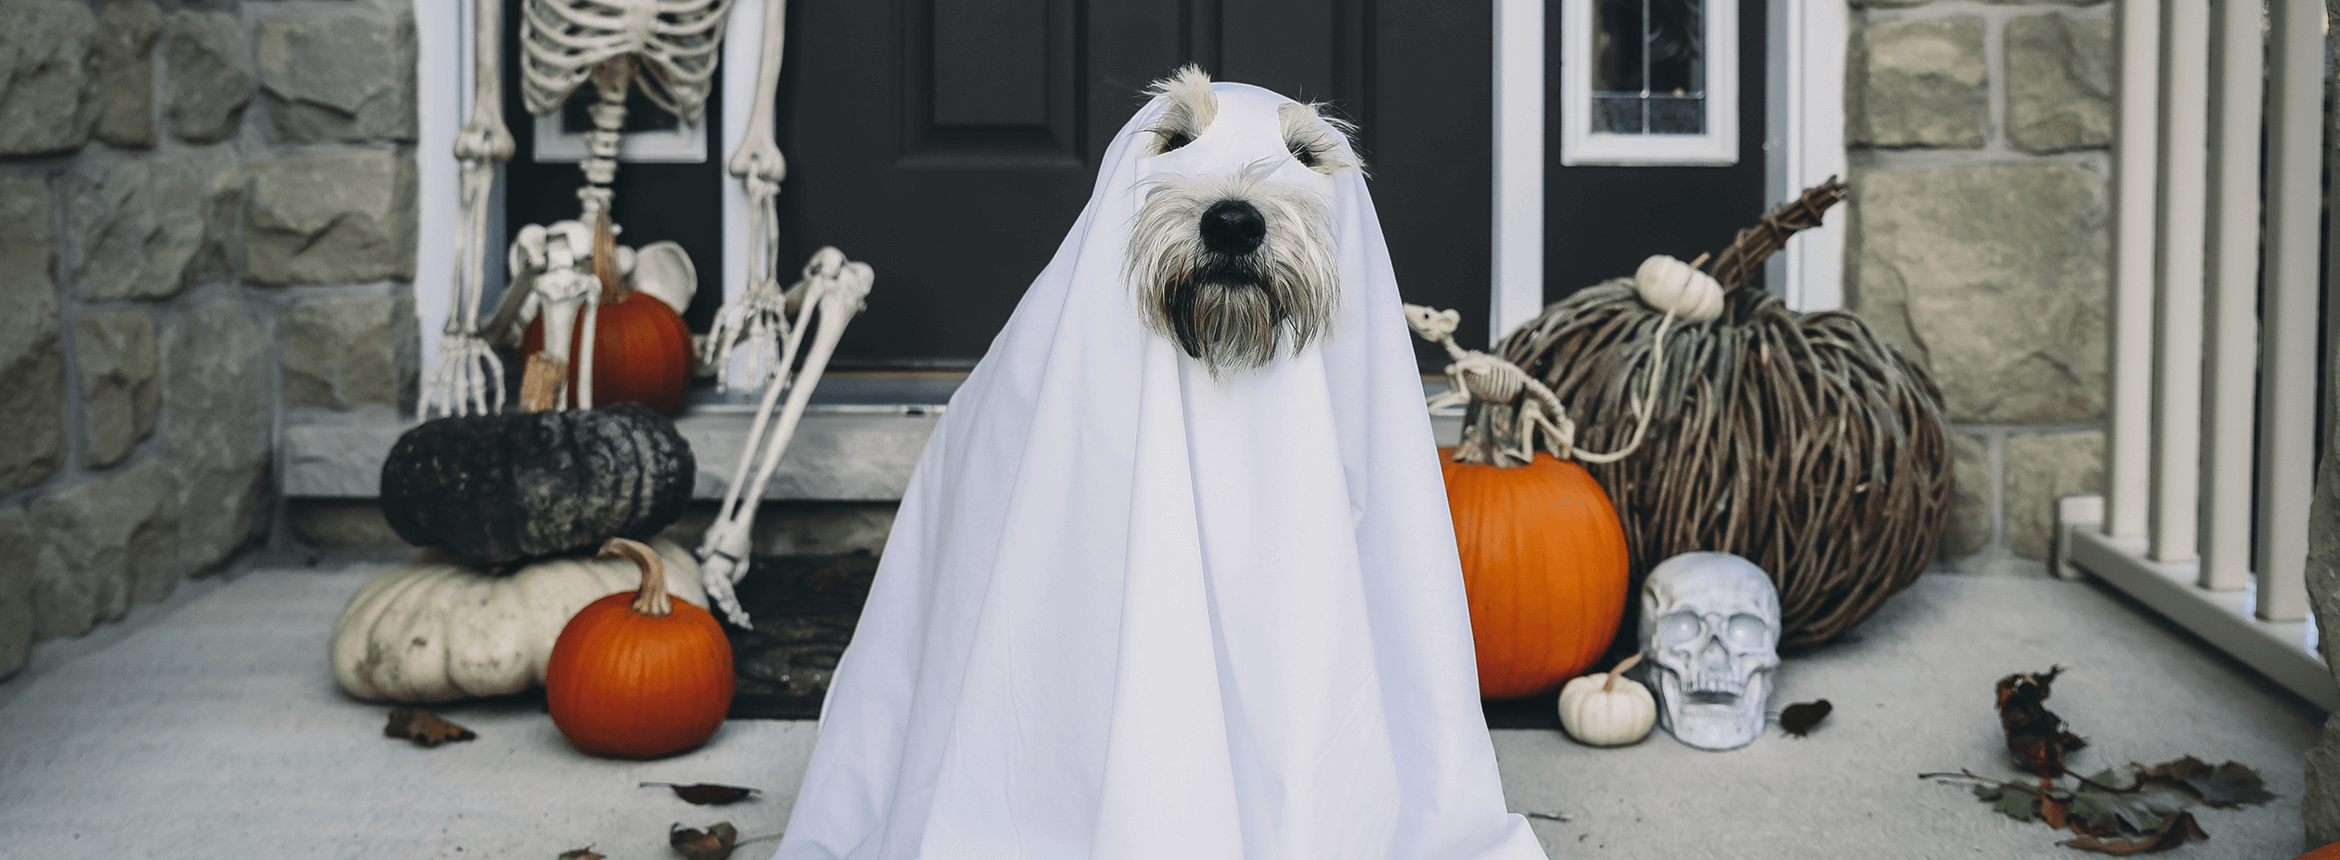 image of dog in halloween ghost costume